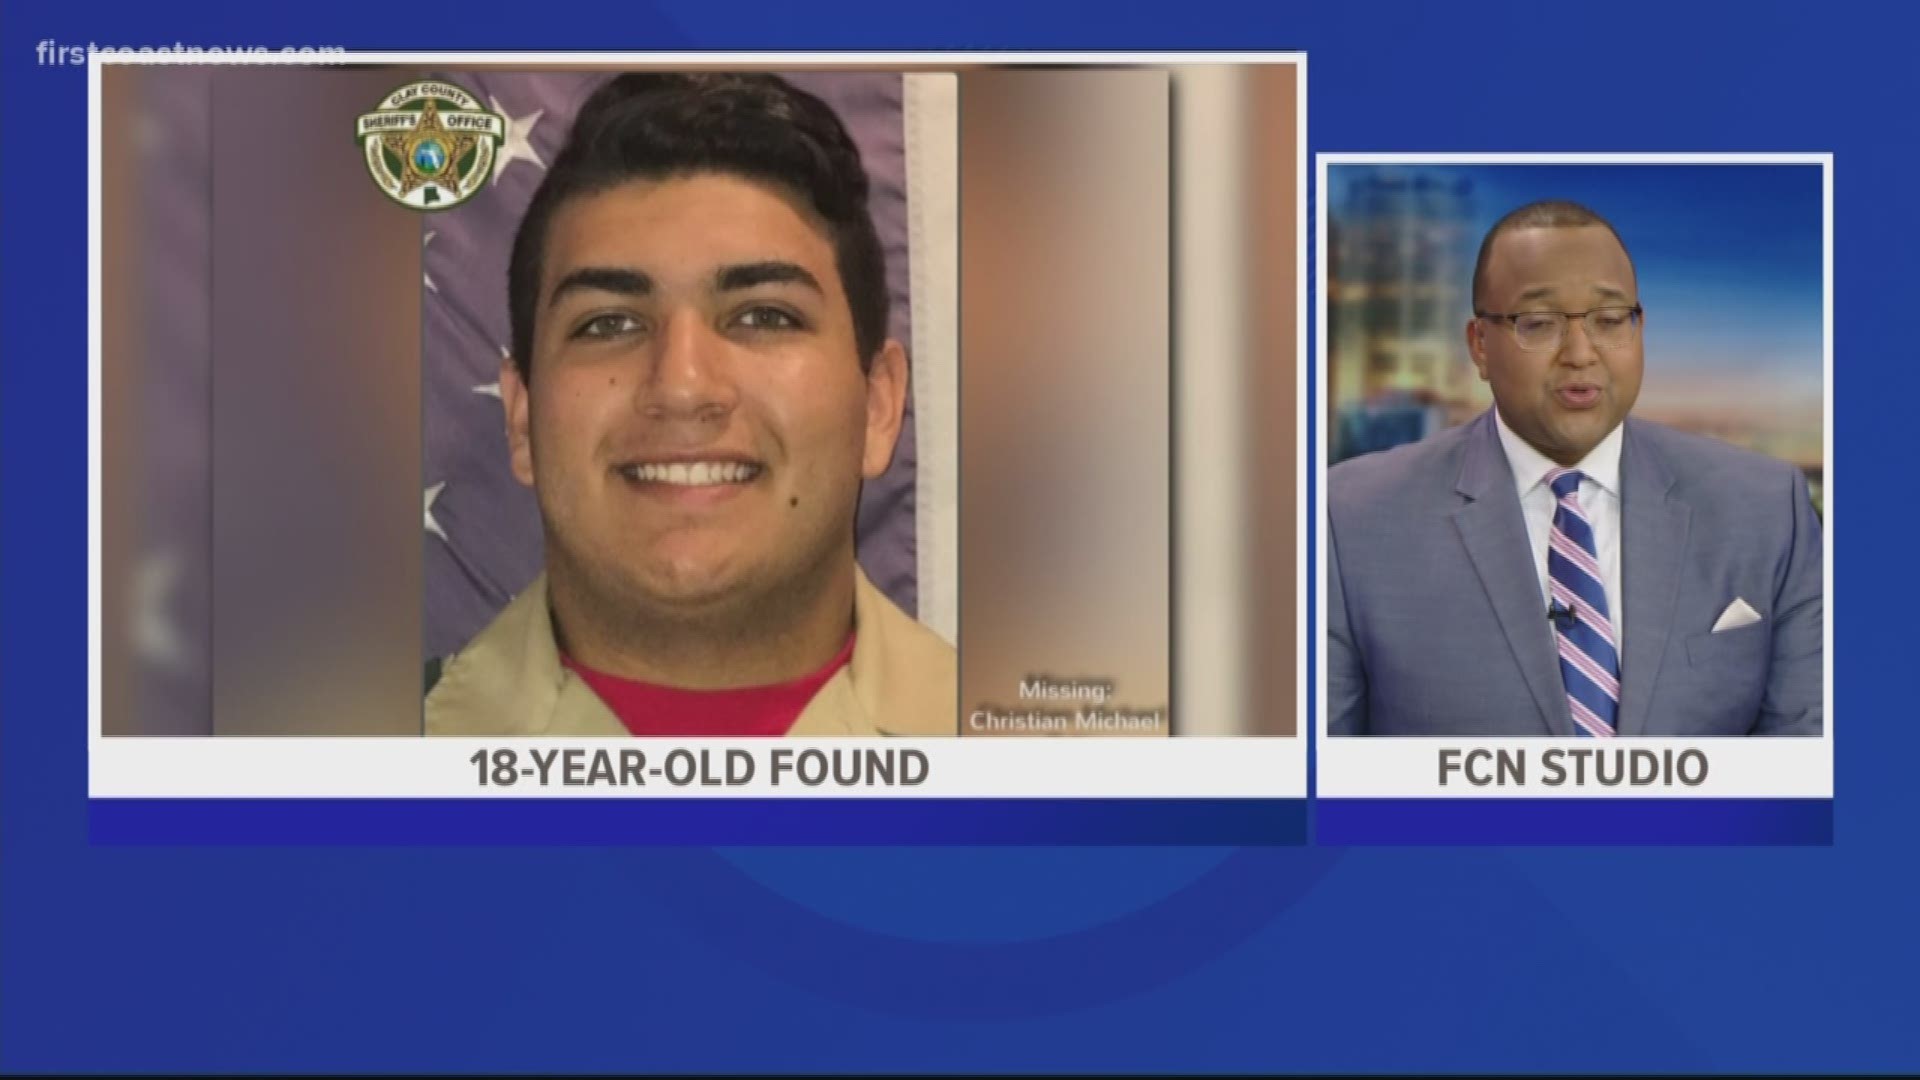 Christian Michael Ortiz, 18, was reported missing after he was last seen Tuesday. He was found safe Wednesday evening.